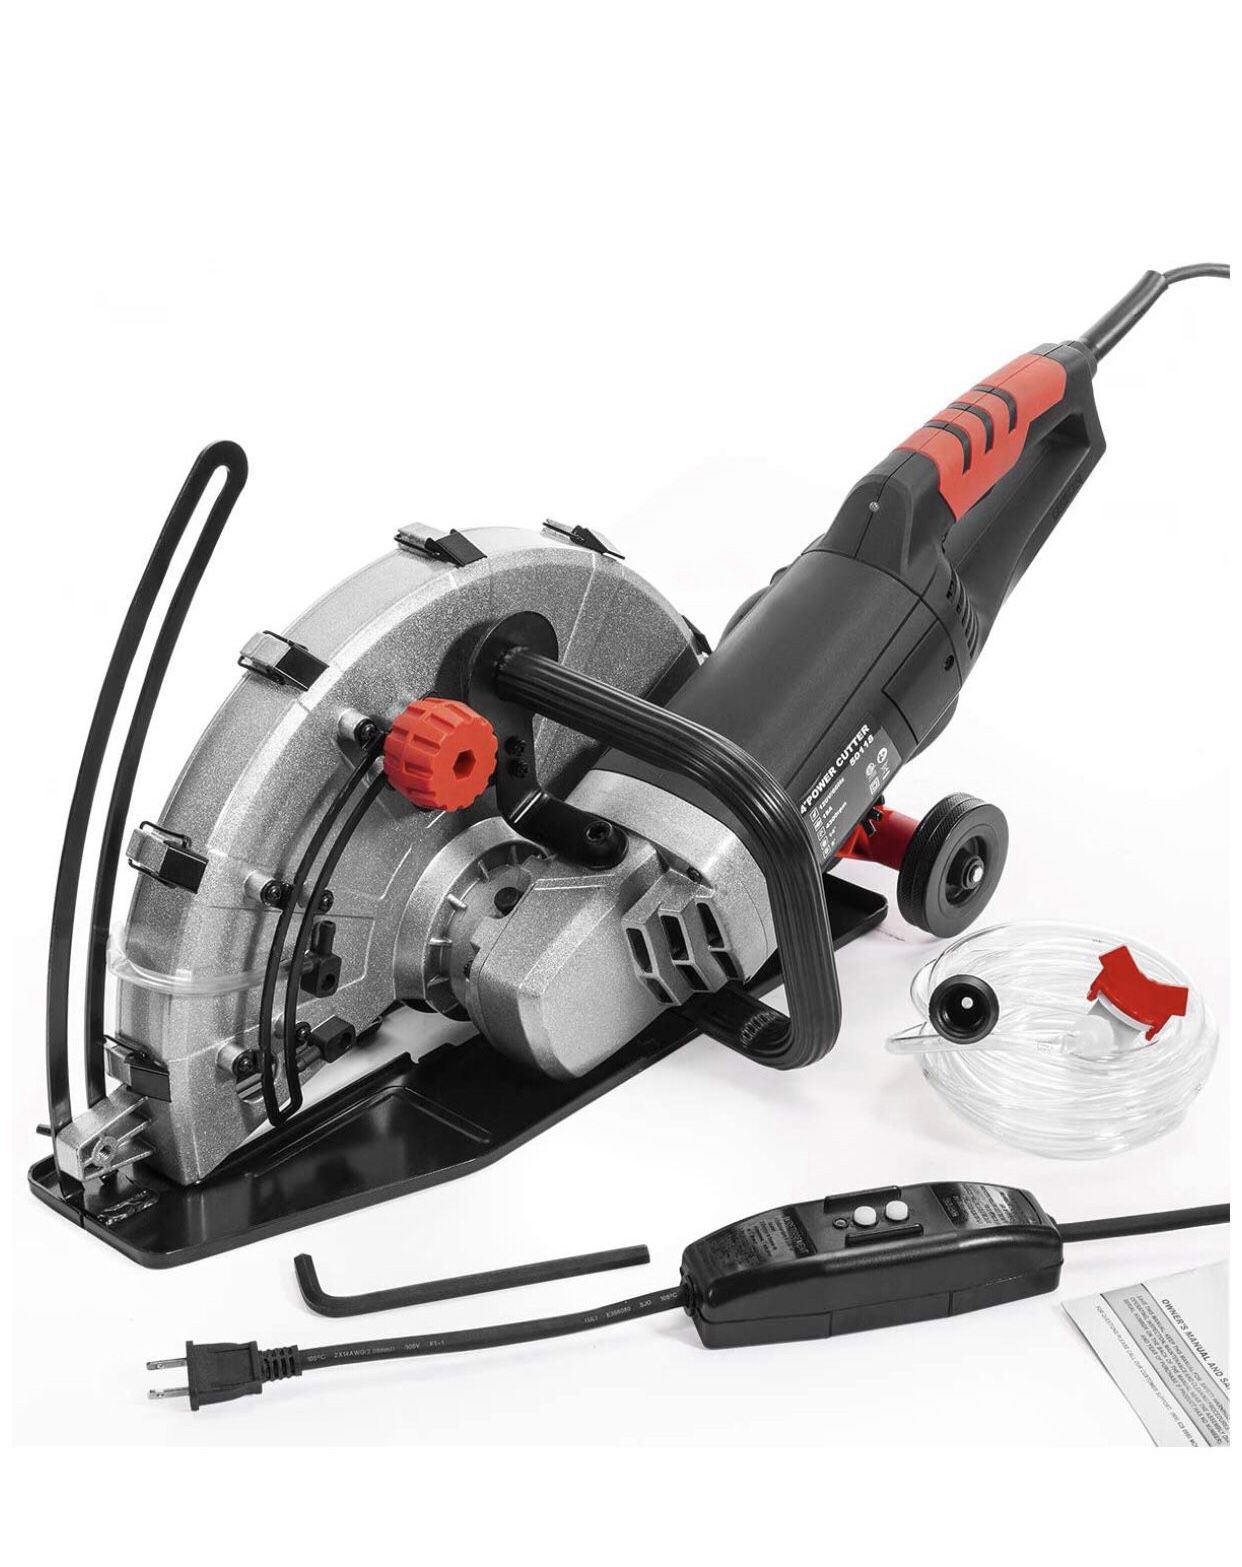 XtremepowerUS 2600W Electric 14" Disc Cutter Circular Saw Concrete Saw Power Angle Cutter Wet/Dry Circular Blade w/Guide Roller